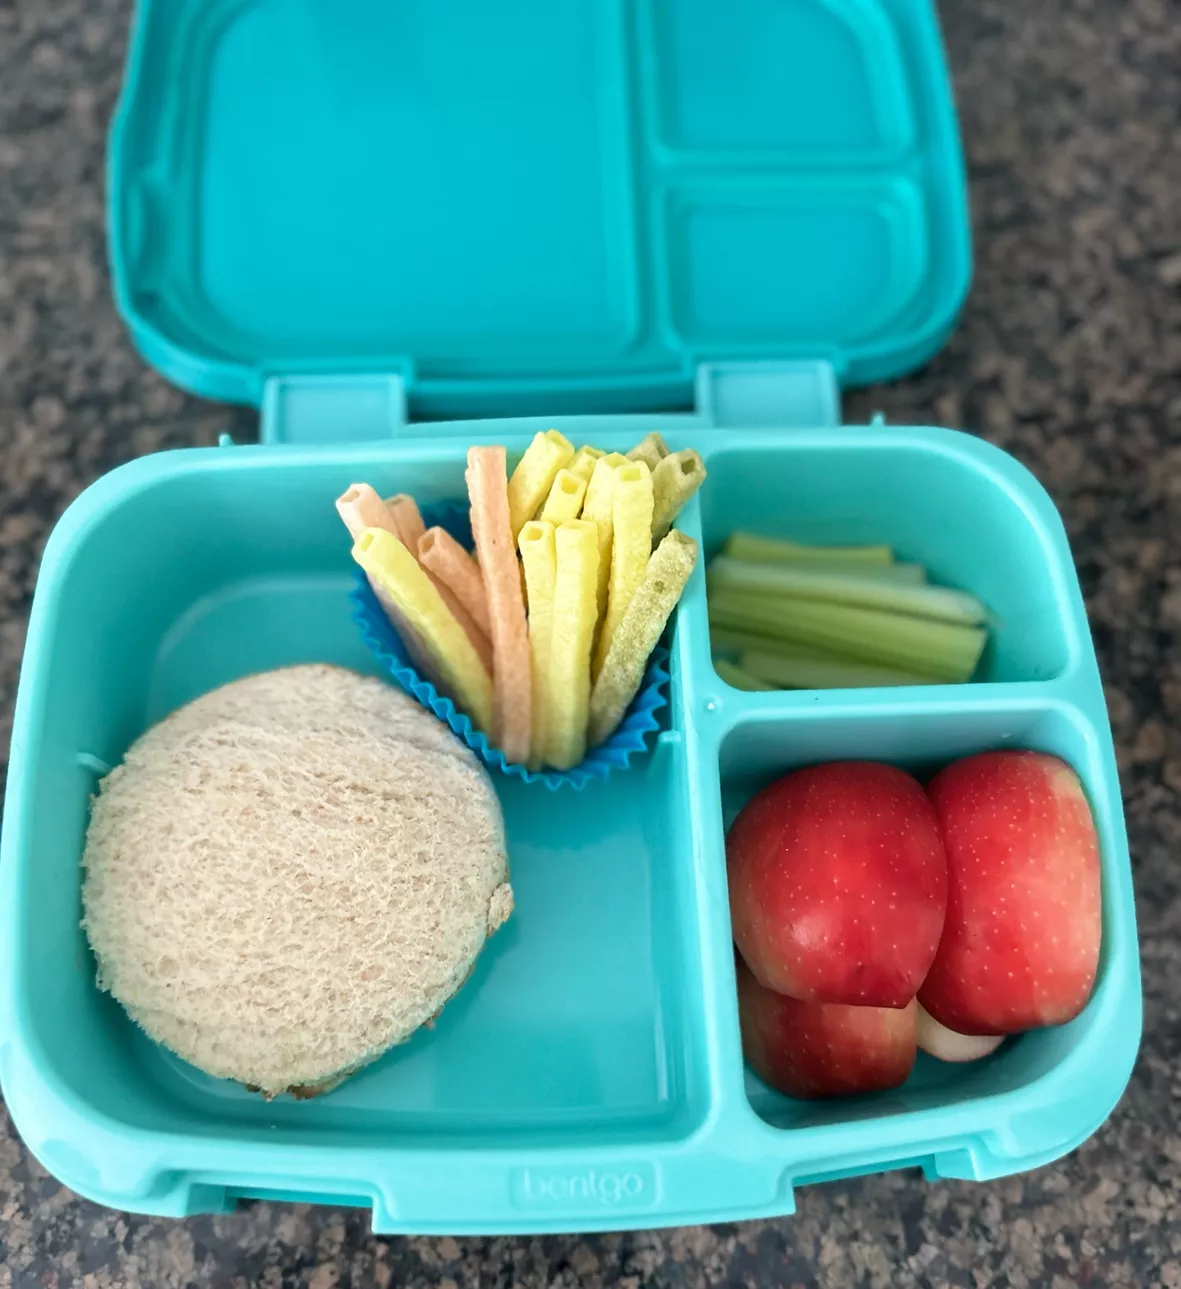 Bento School Lunches : 4 Easy Lunches in Leak-Proof Bentgo Kids